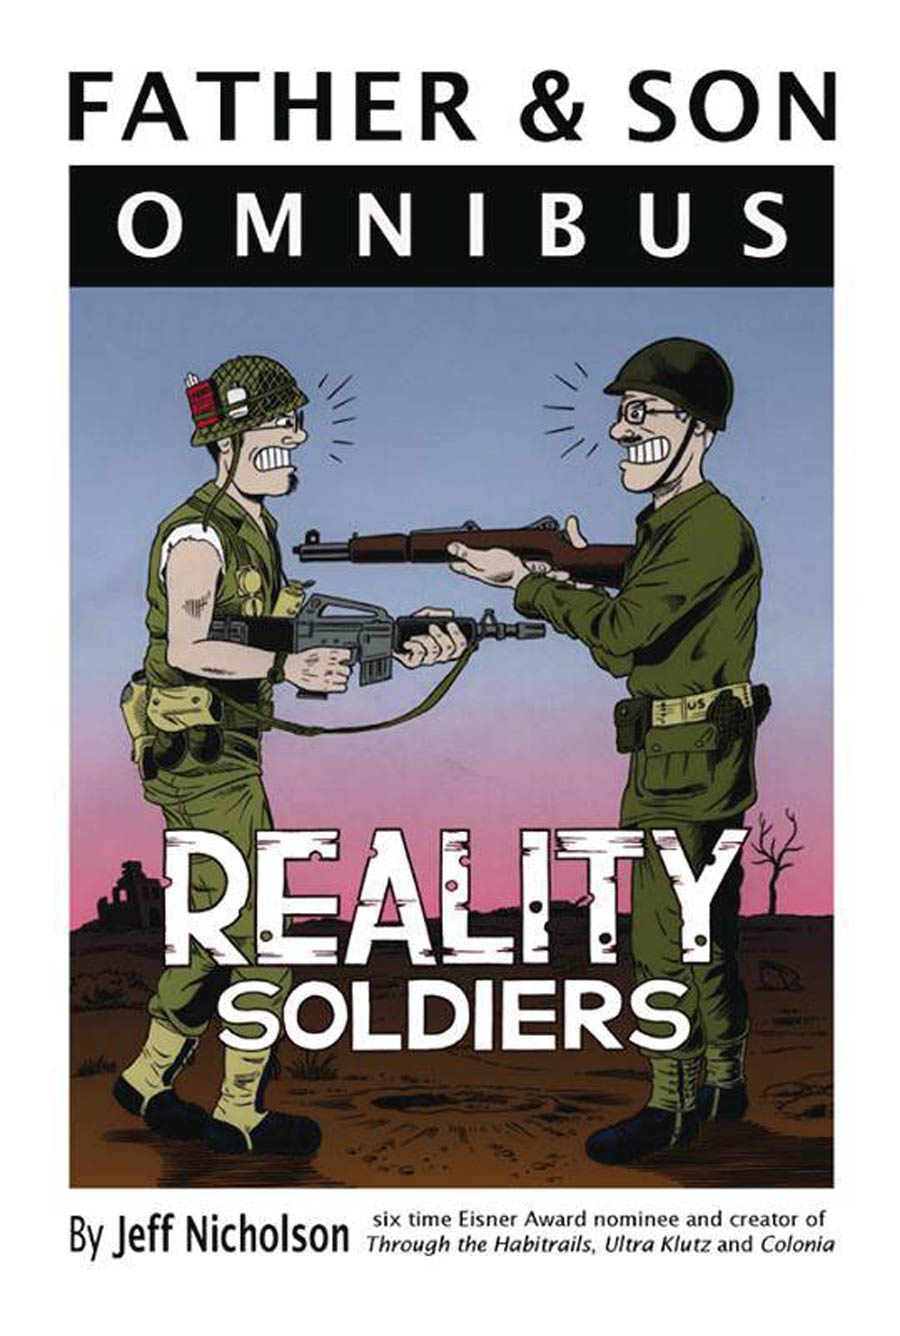 Father & Son Omnibus Reality Soldiers TP